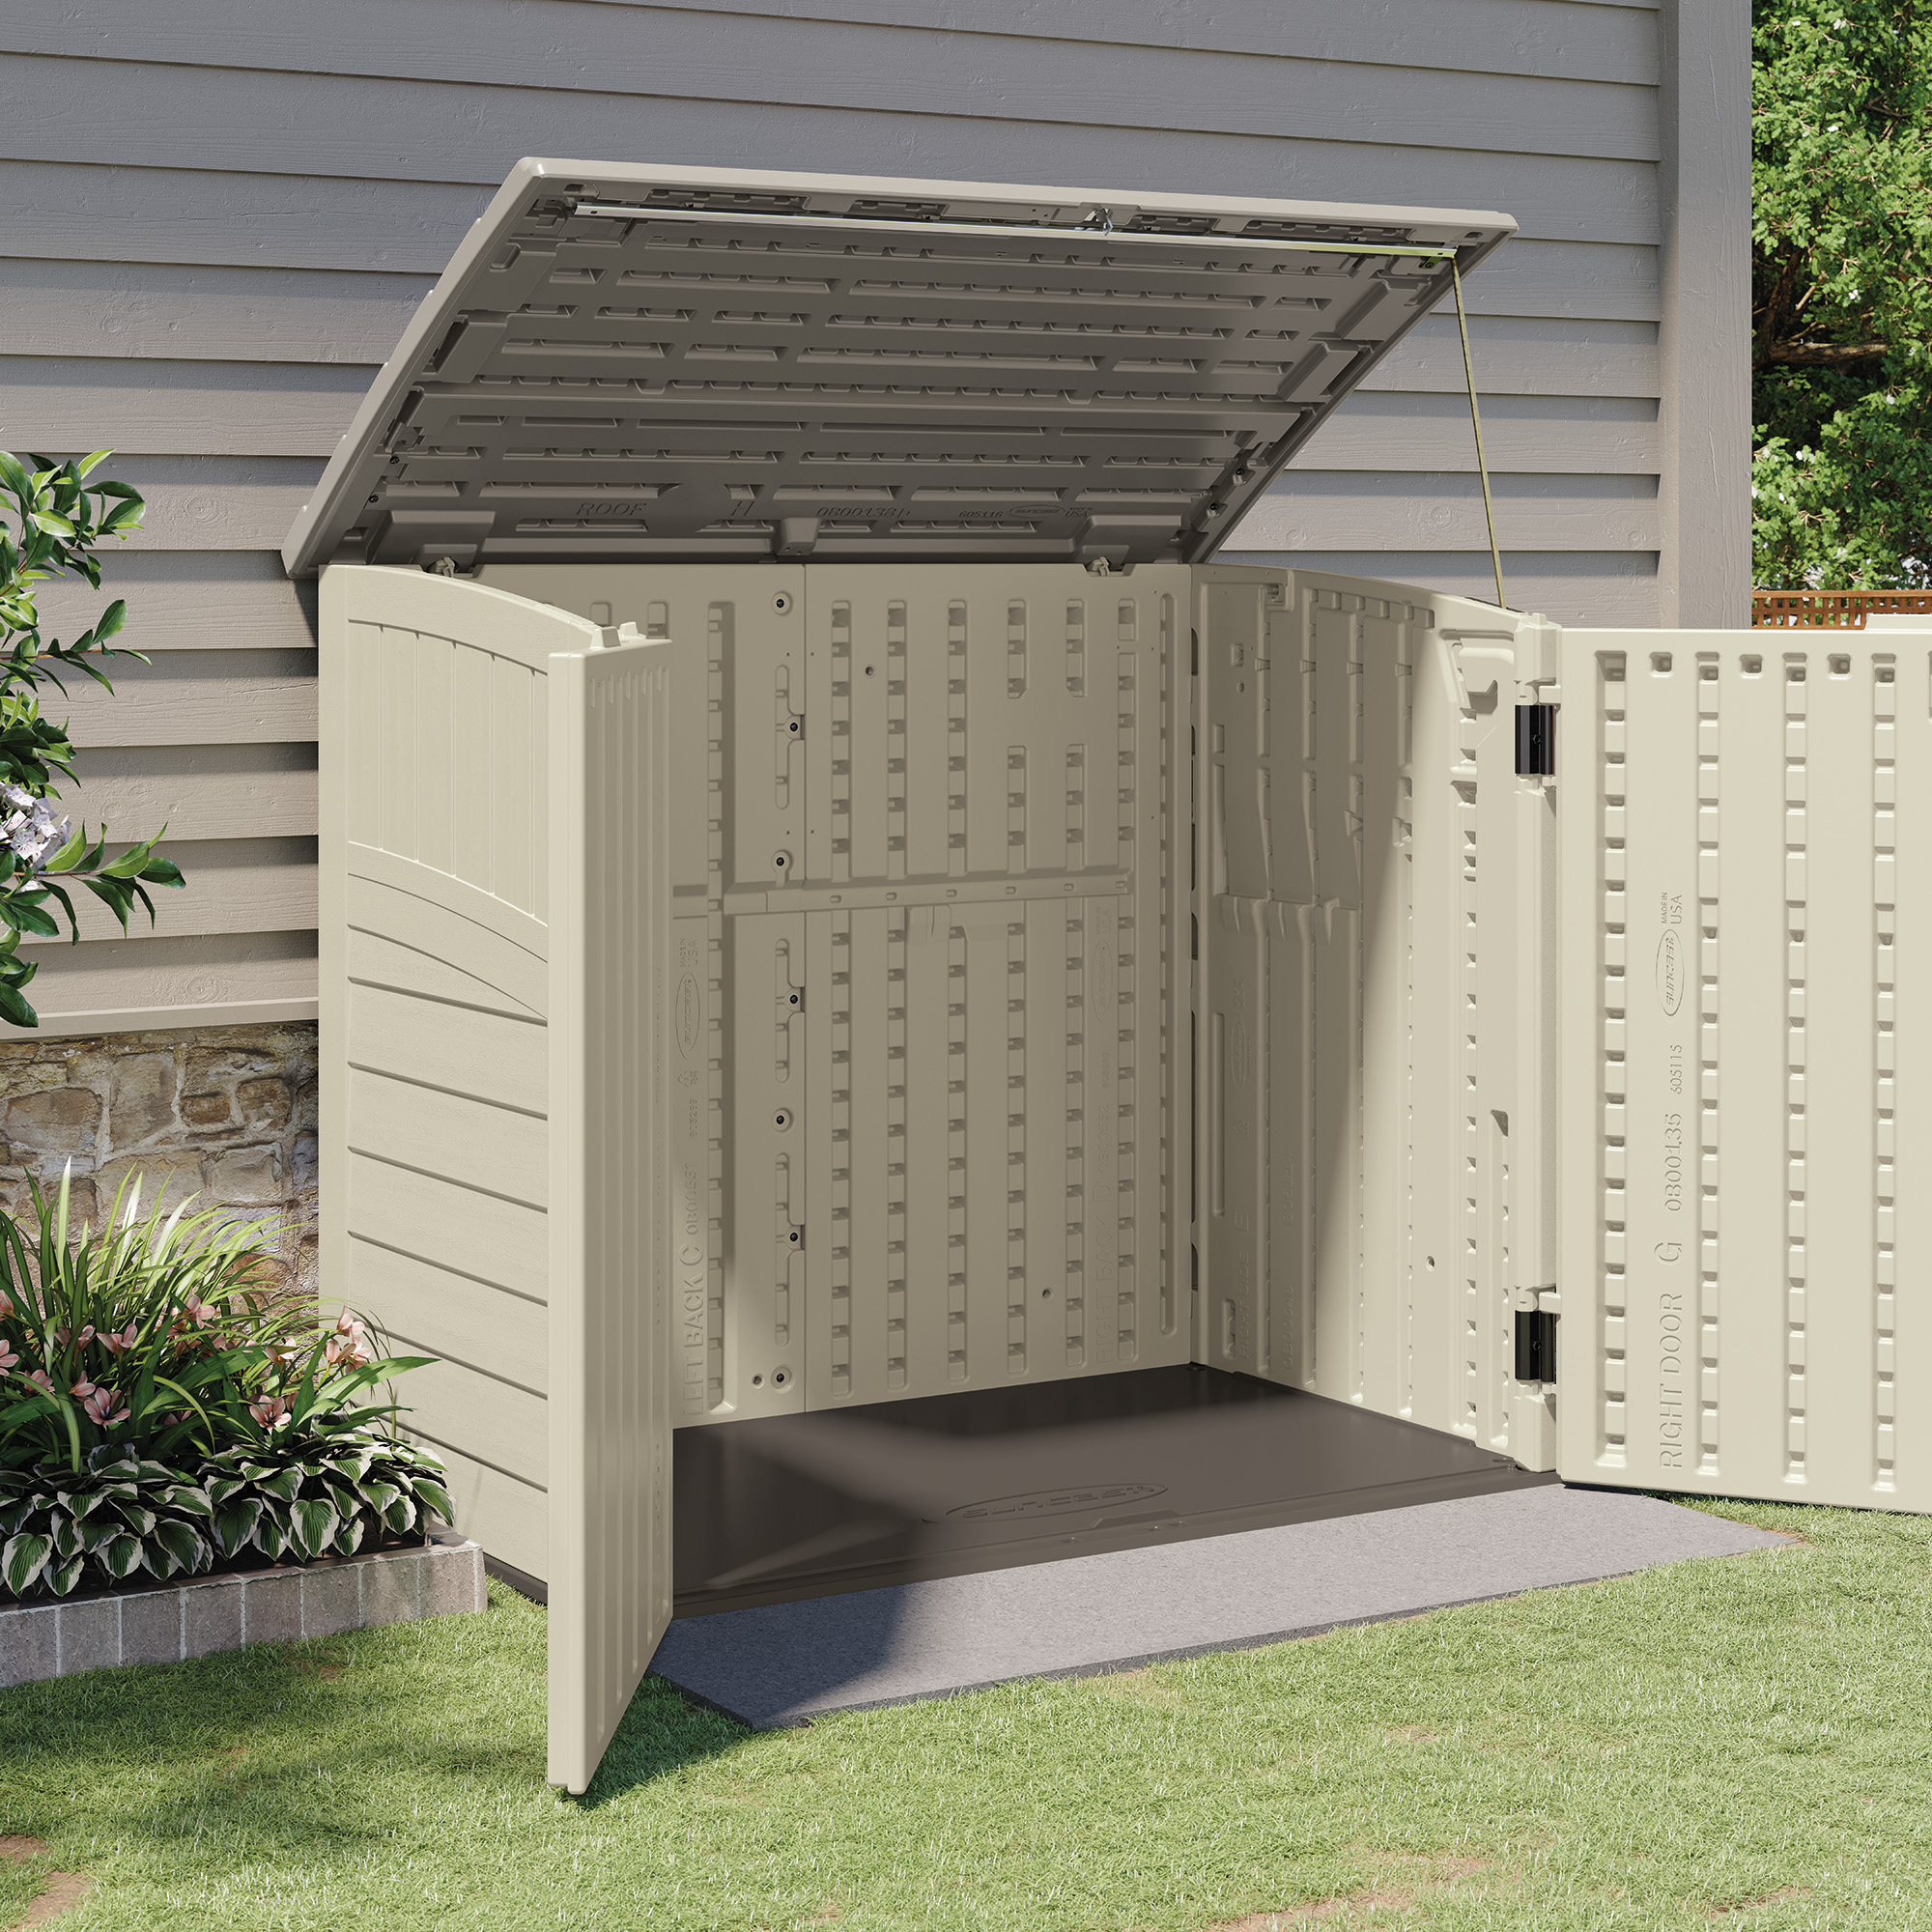 Suncast 34 cu. ft. Horizontal Outdoor Resin Storage Shed, Vanilla, 53 in D x 45.5 in H x 32.25 in W - image 3 of 10